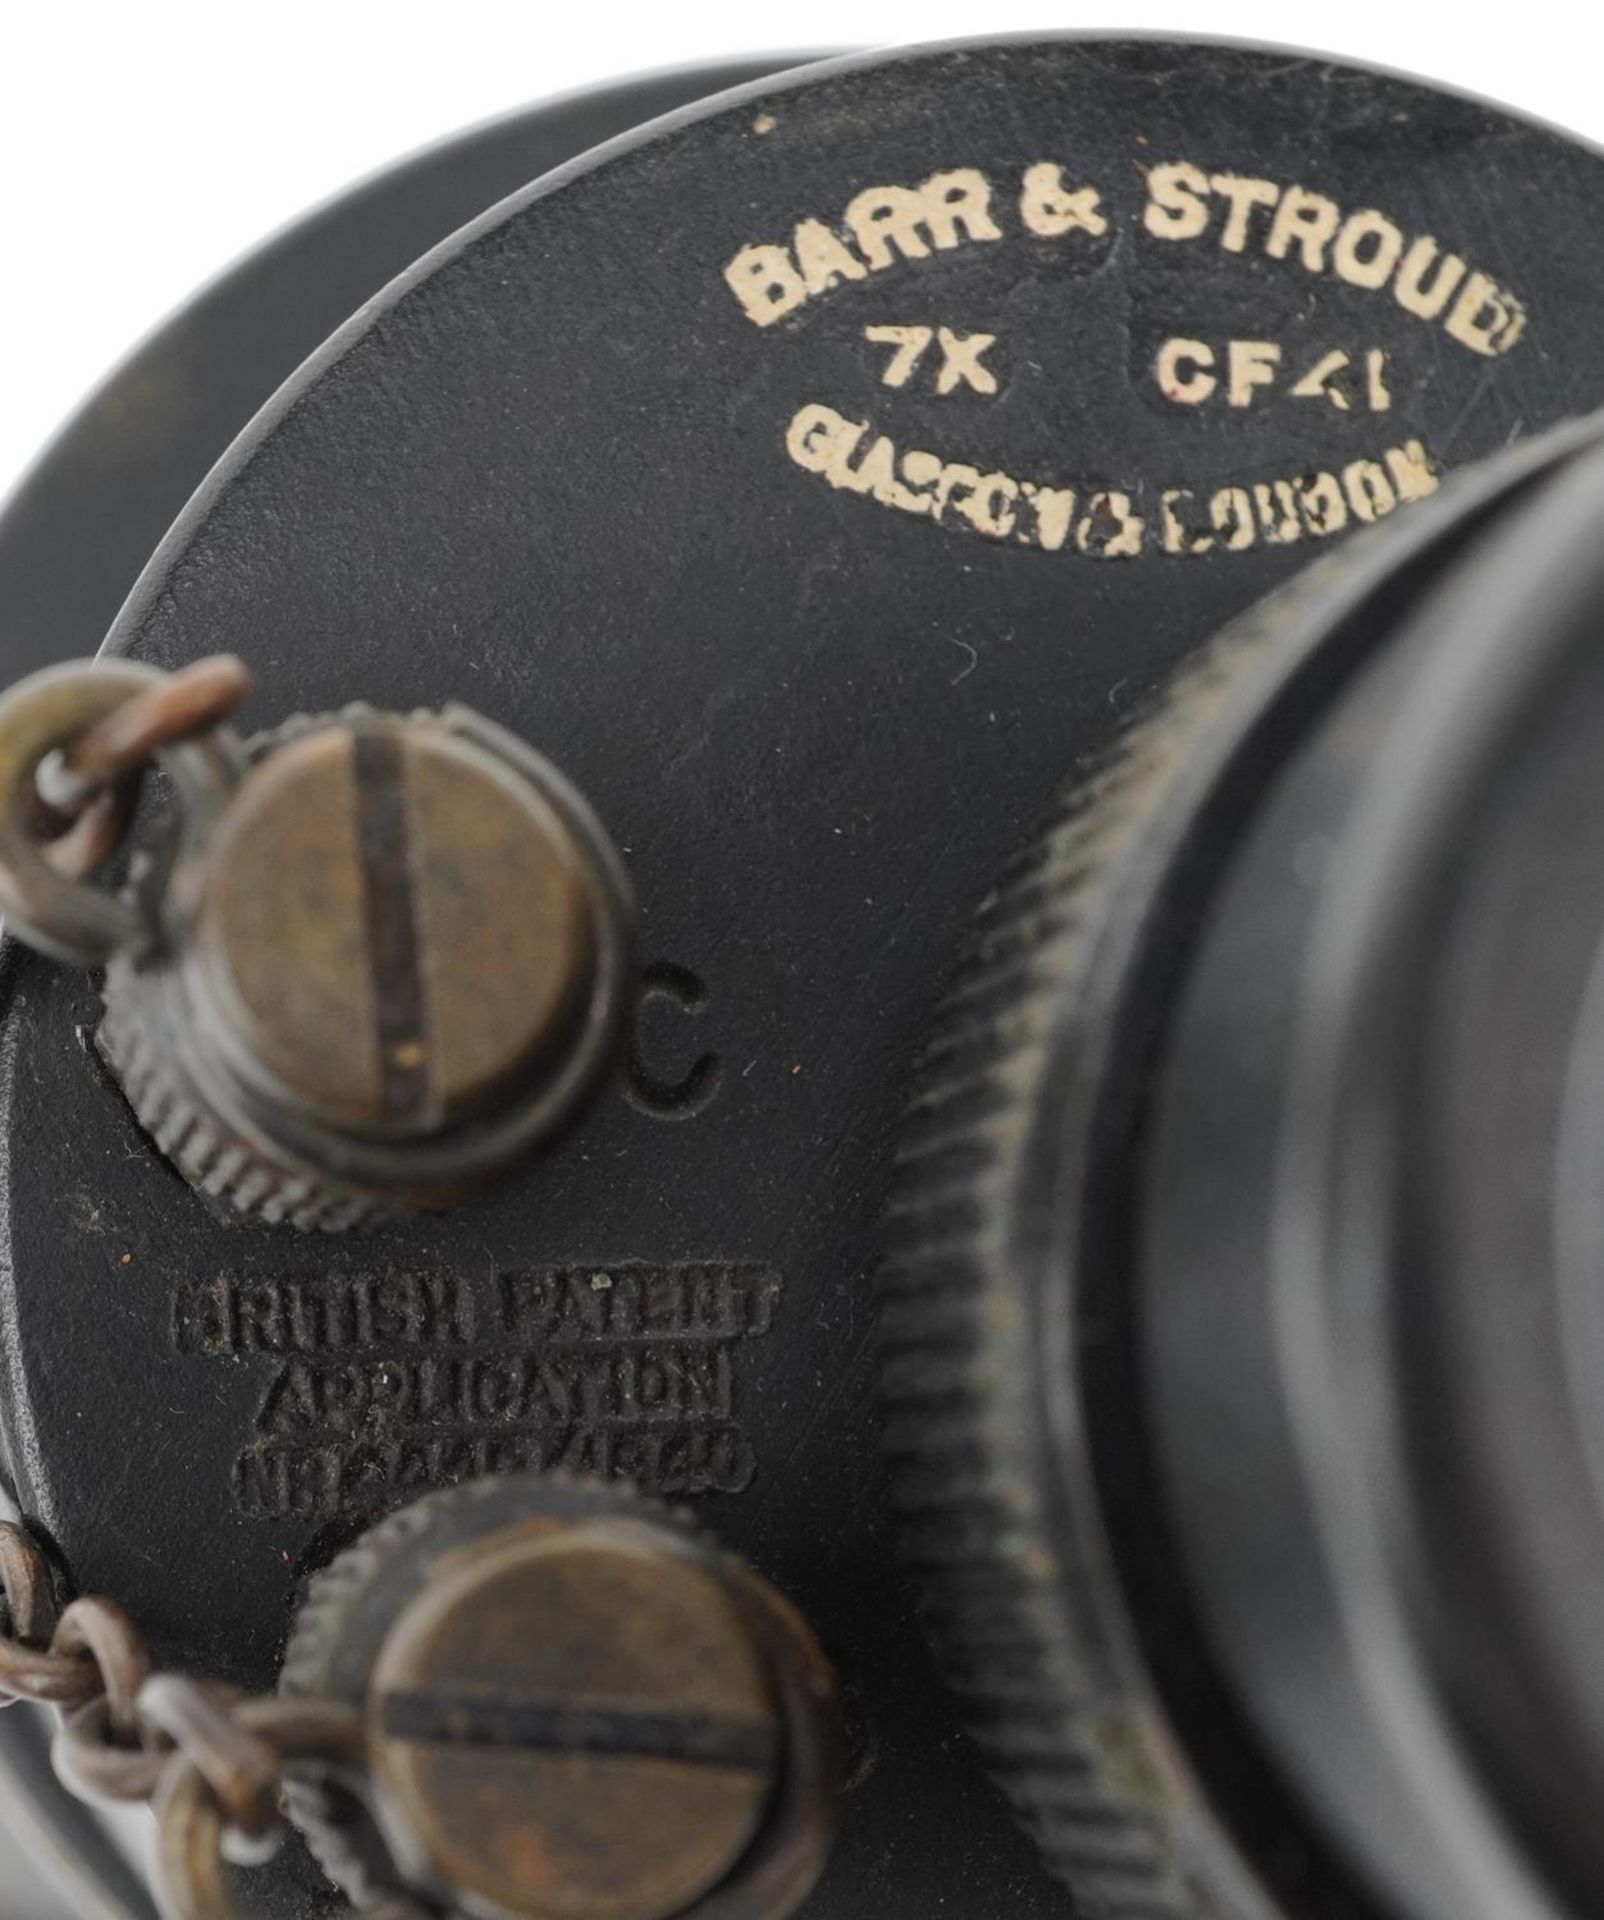 Barr & Stroud, pair of military issue 7 x binoculars with leather case numbered 1900A, serial number - Bild 4 aus 4